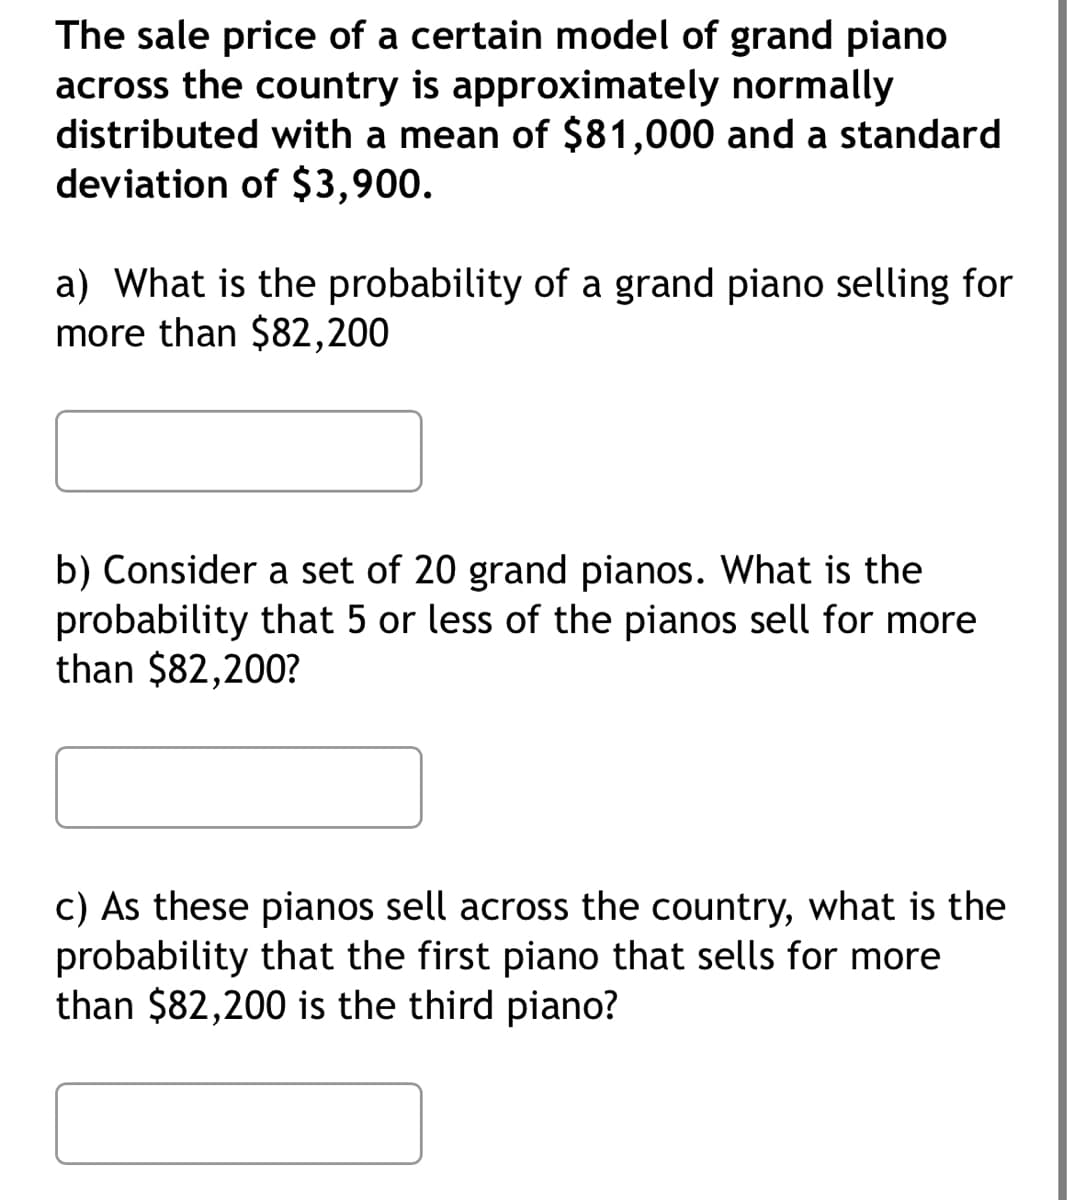 The sale price of a certain model of grand piano
across the country is approximately normally
distributed with a mean of $81,000 and a standard
deviation of $3,900.
a) What is the probability of a grand piano selling for
more than $82,200
b) Consider a set of 20 grand pianos. What is the
probability that 5 or less of the pianos sell for more
than $82,200?
c) As these pianos sell across the country, what is the
probability that the first piano that sells for more
than $82,200 is the third piano?